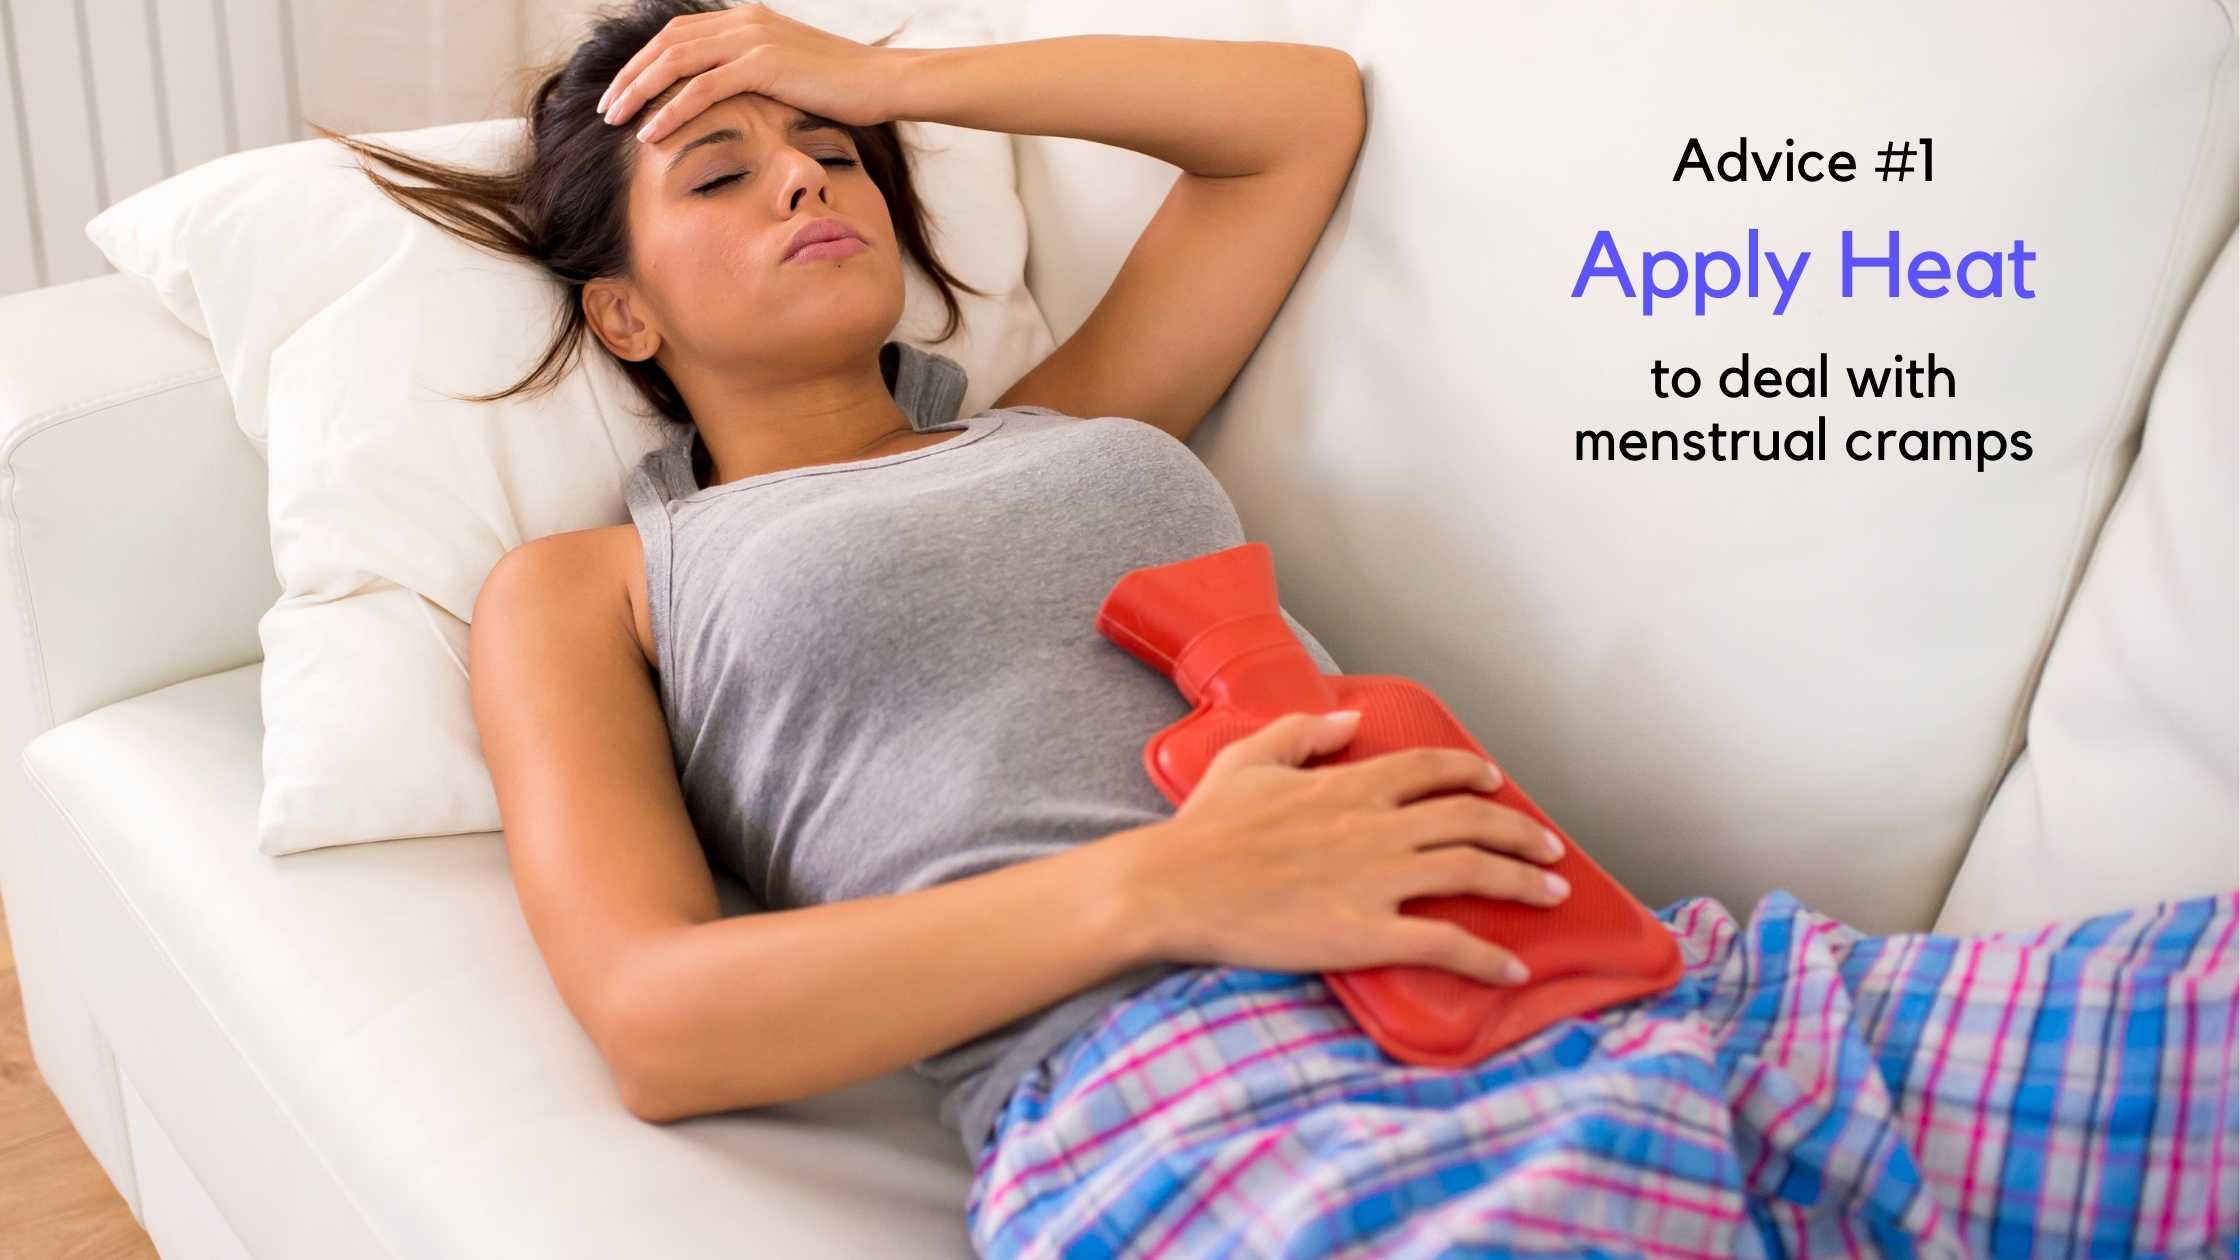 Apply Heat to deal with menstrual cramps